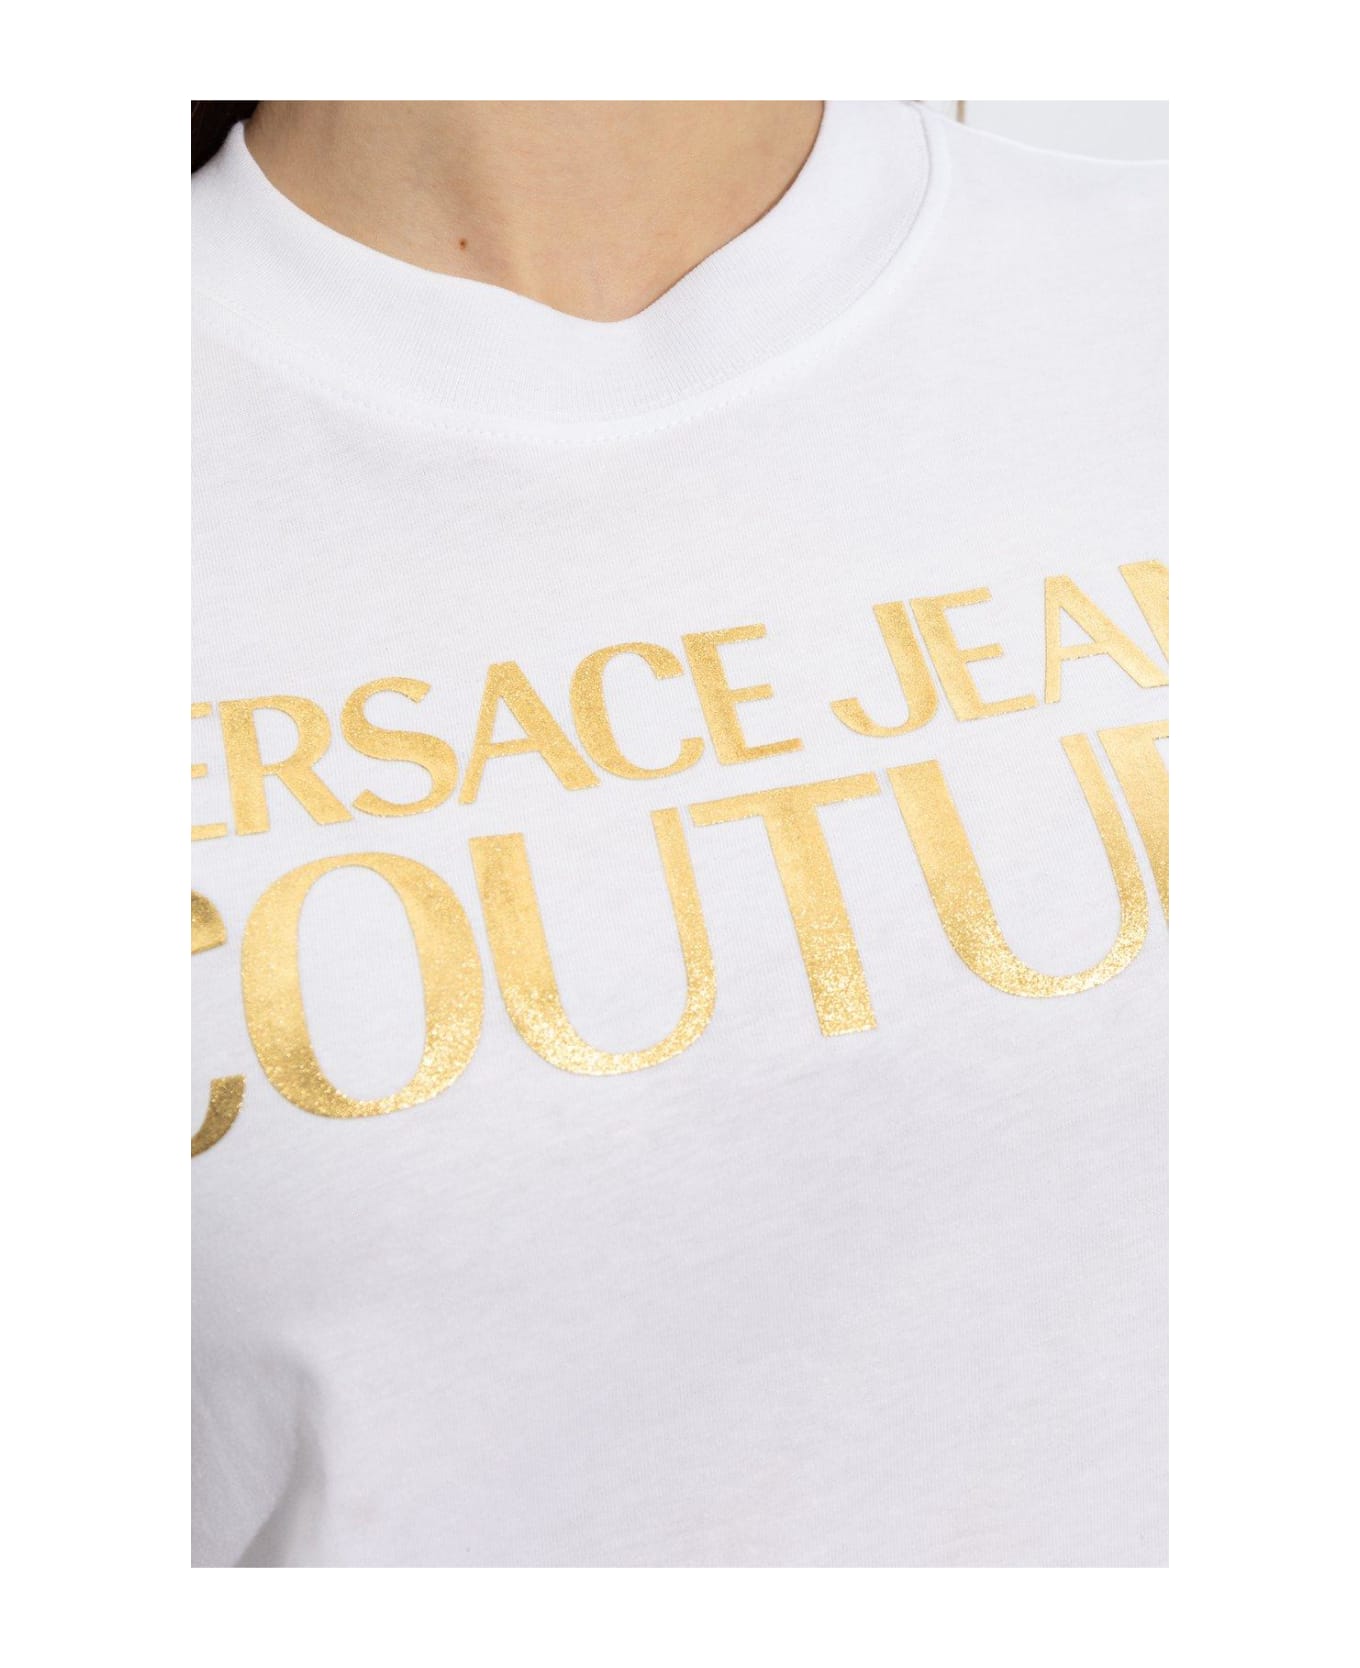 Versace Jeans Couture Logo Printed Crewneck T-shirt - White/gold